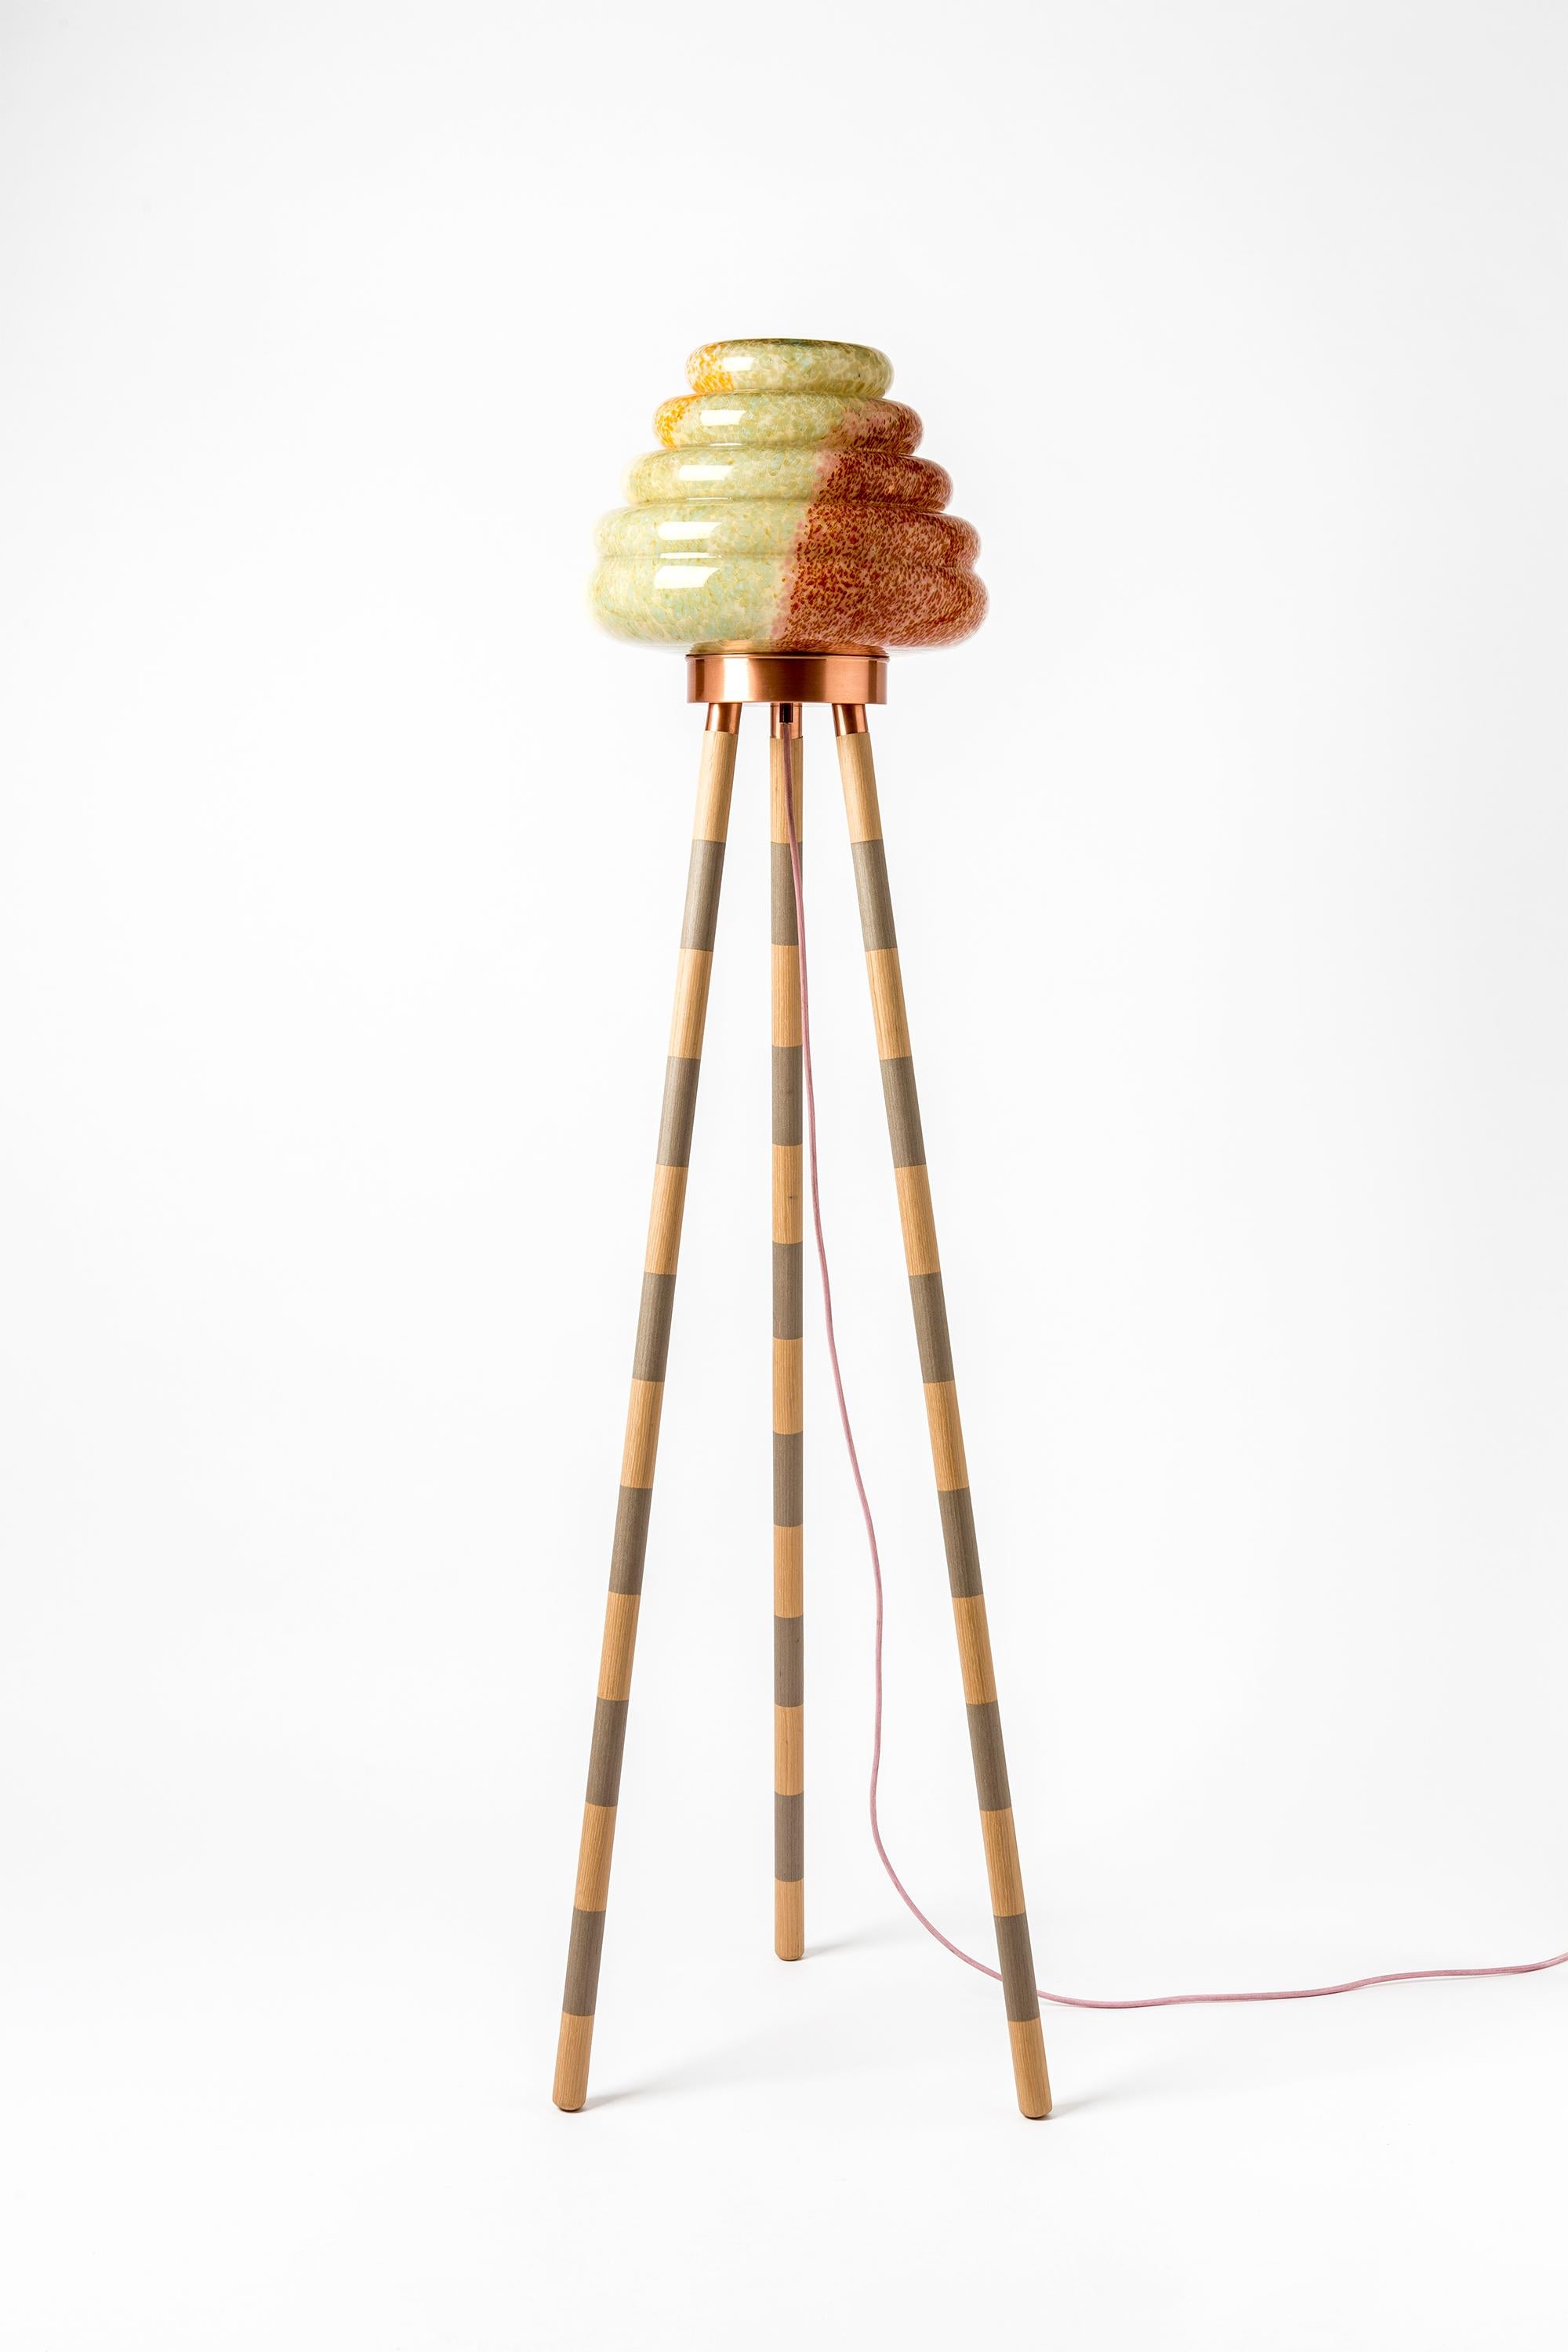 Arts and Crafts Contemporary Handblown Glass Colmena Floor Lamp with Wooden Legs For Sale